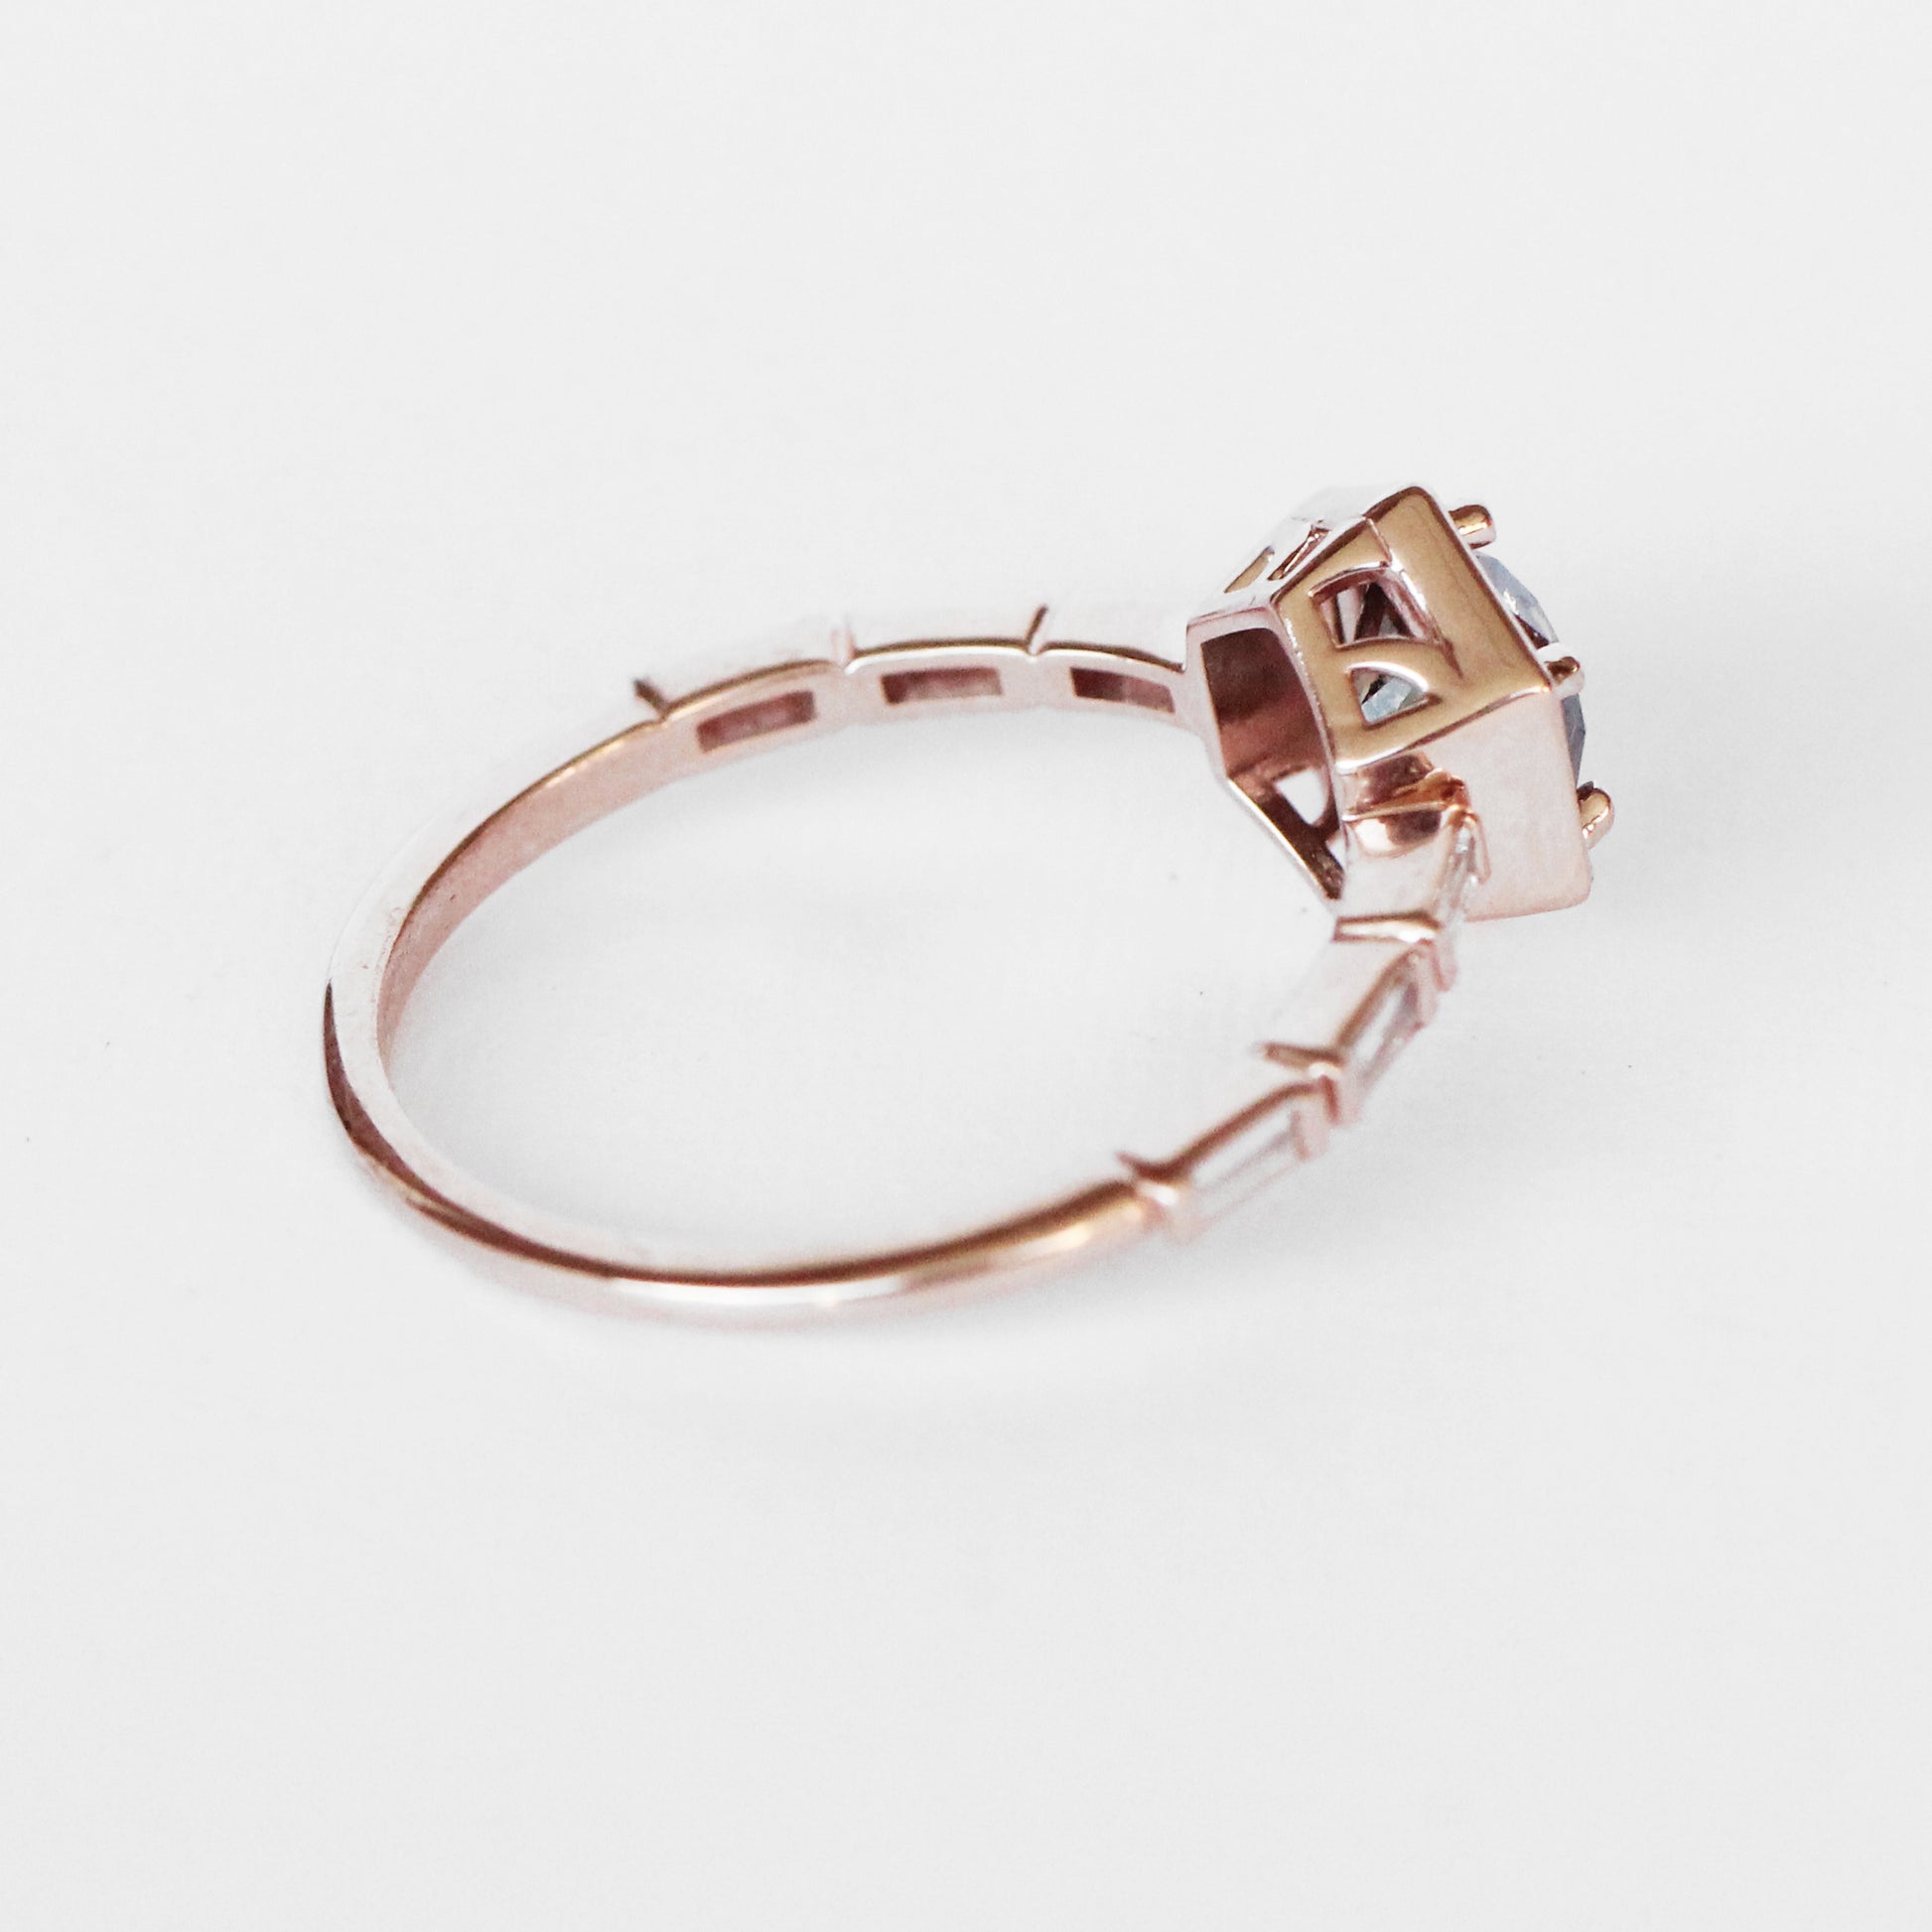 Lennen Ring with a Champagne Celestial and Diamond Accents in 10k Rose Gold - Ready to Size and Ship - Midwinter Co. Alternative Bridal Rings and Modern Fine Jewelry